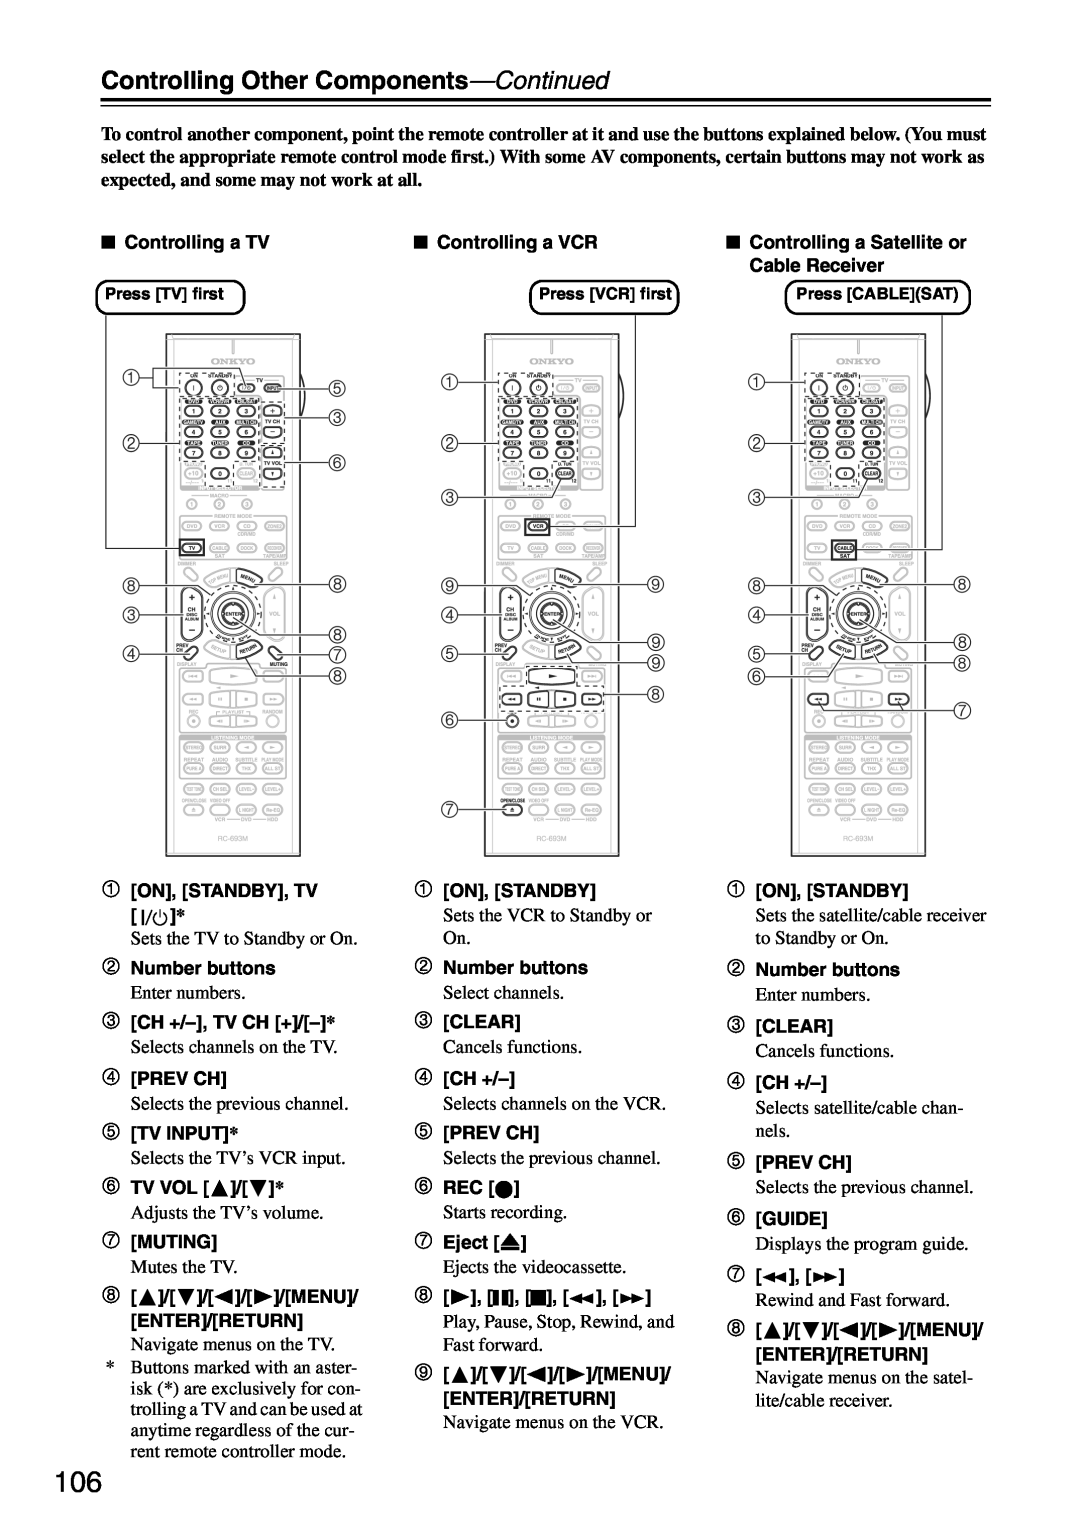 Onkyo TX-SA705 instruction manual Controlling Other Components—Continued 